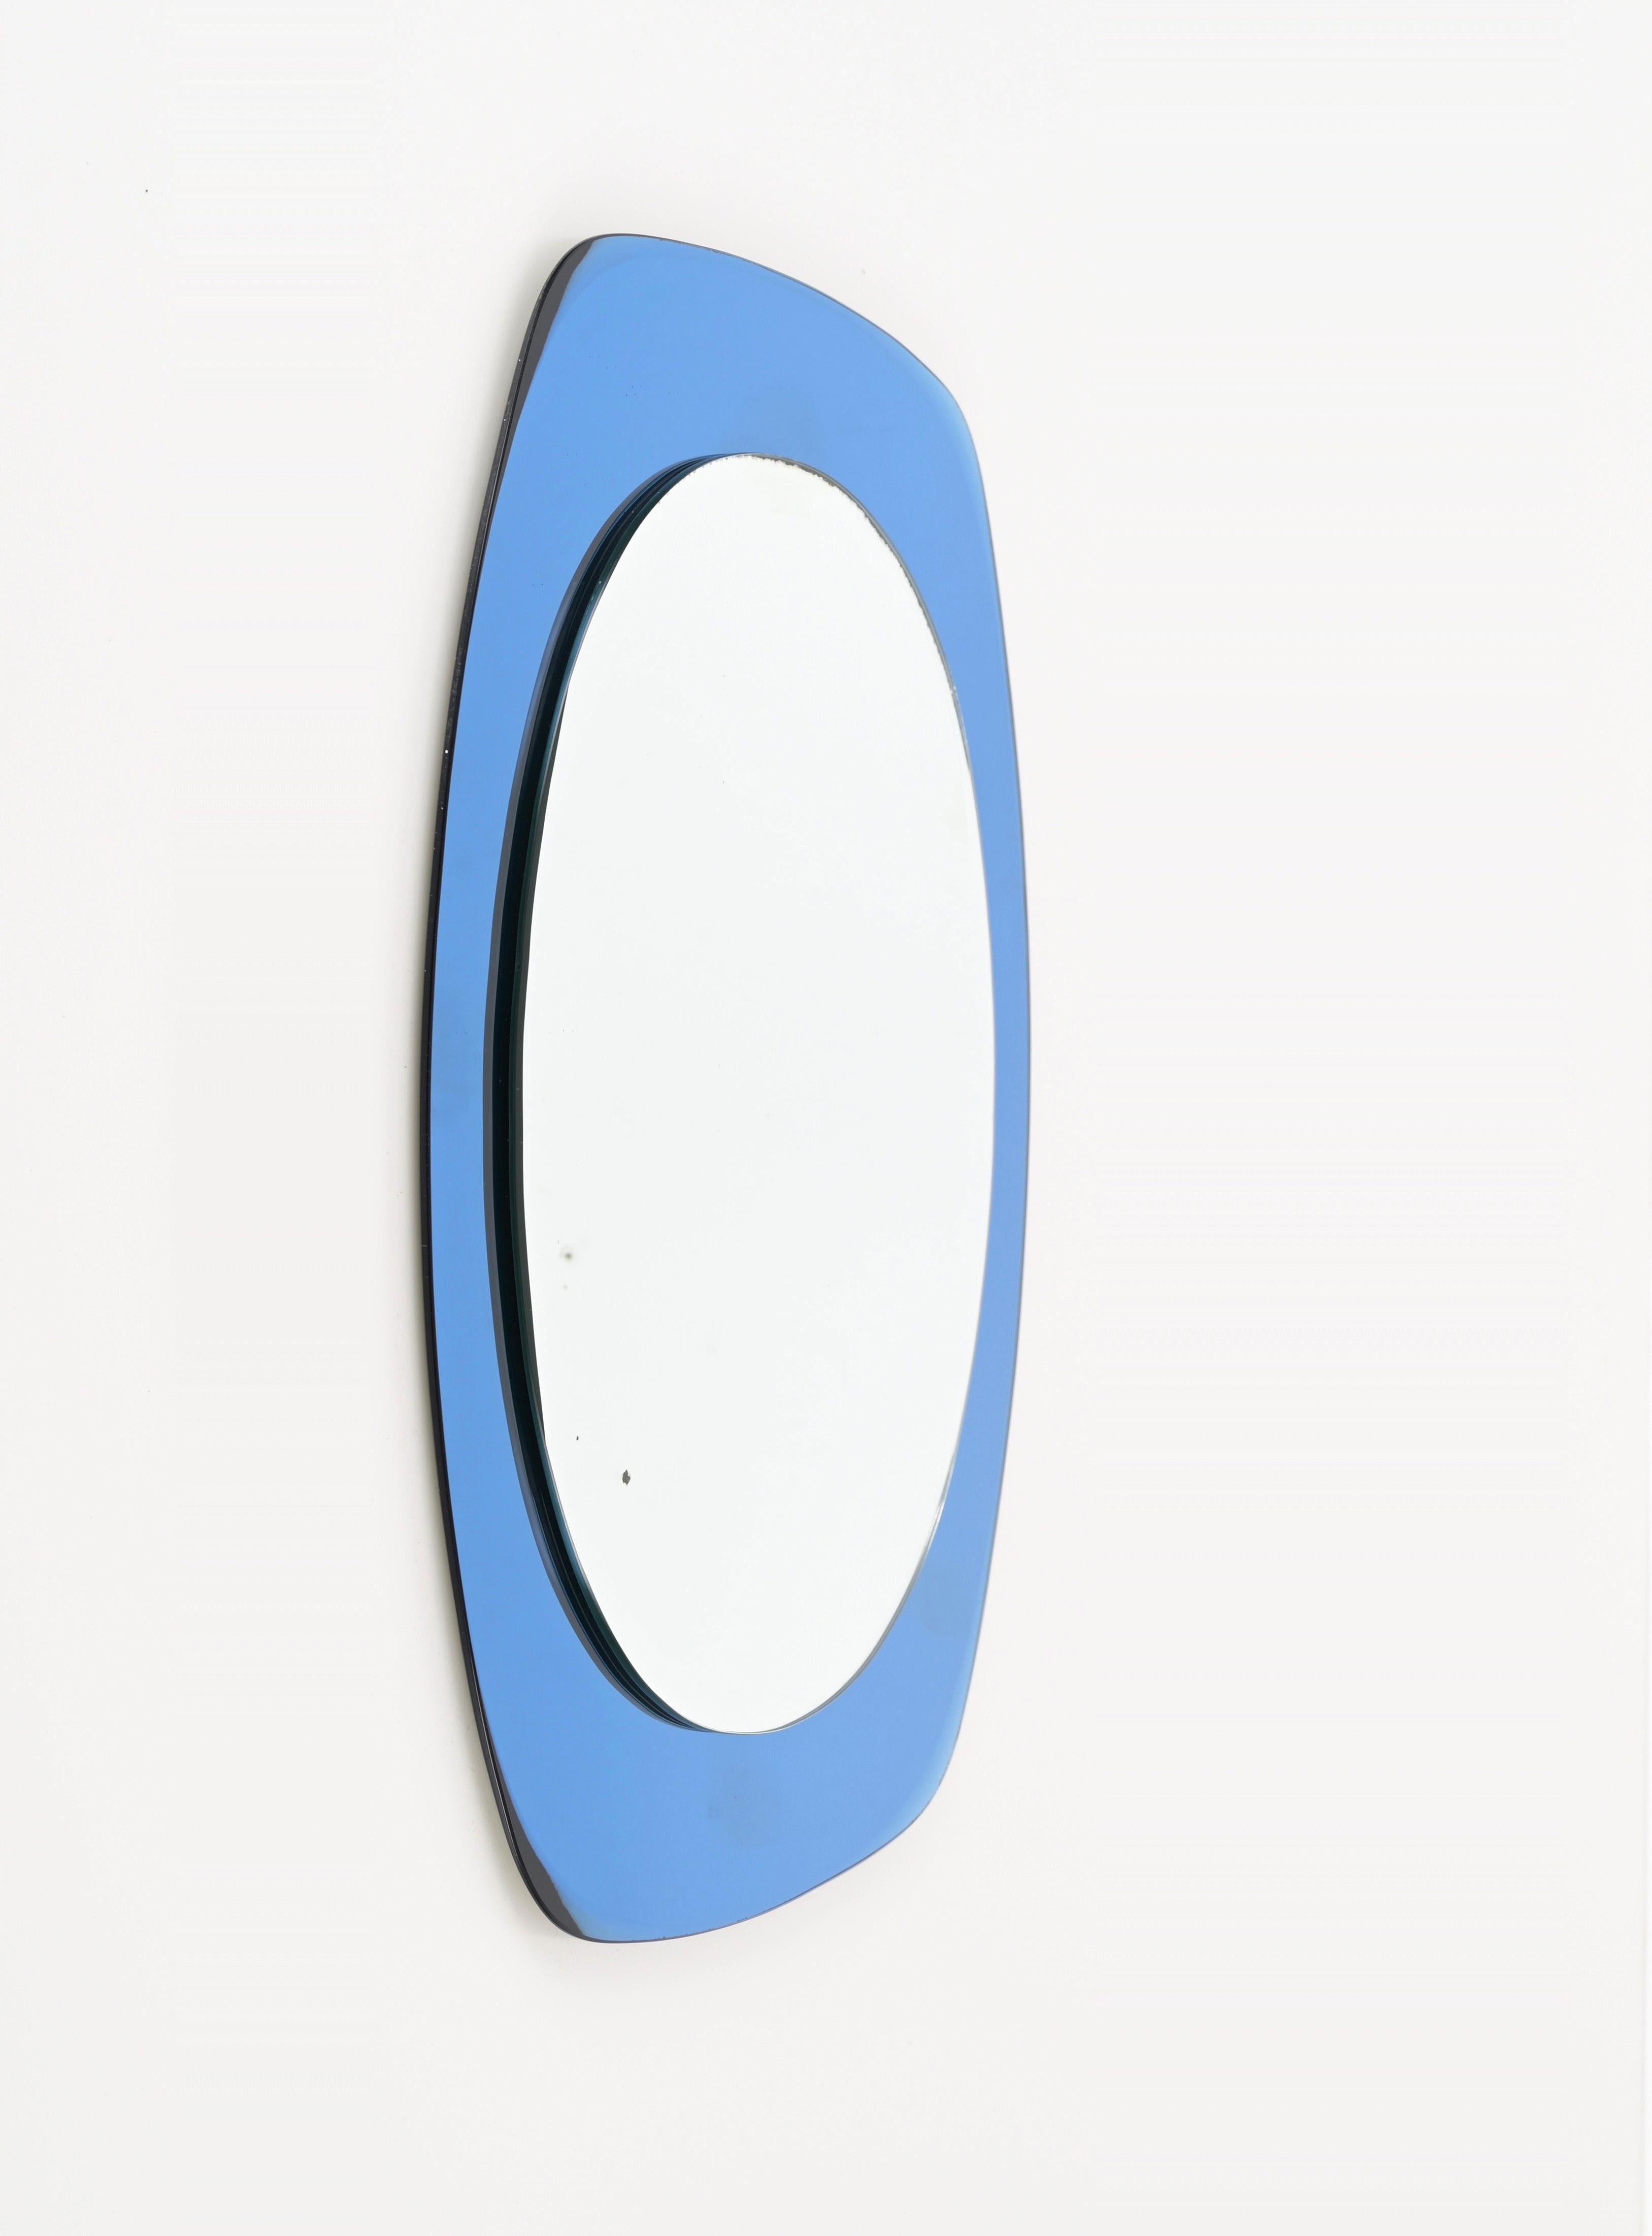 Gorgeous Mid-Century double-levelled mirror with a stunning blue mirror glass frame. This wonderful piece was produced in Italy during the 1960s by Crystal Art.

The blue mirror bevelled frame is incredibly vibrant and will change color depending on